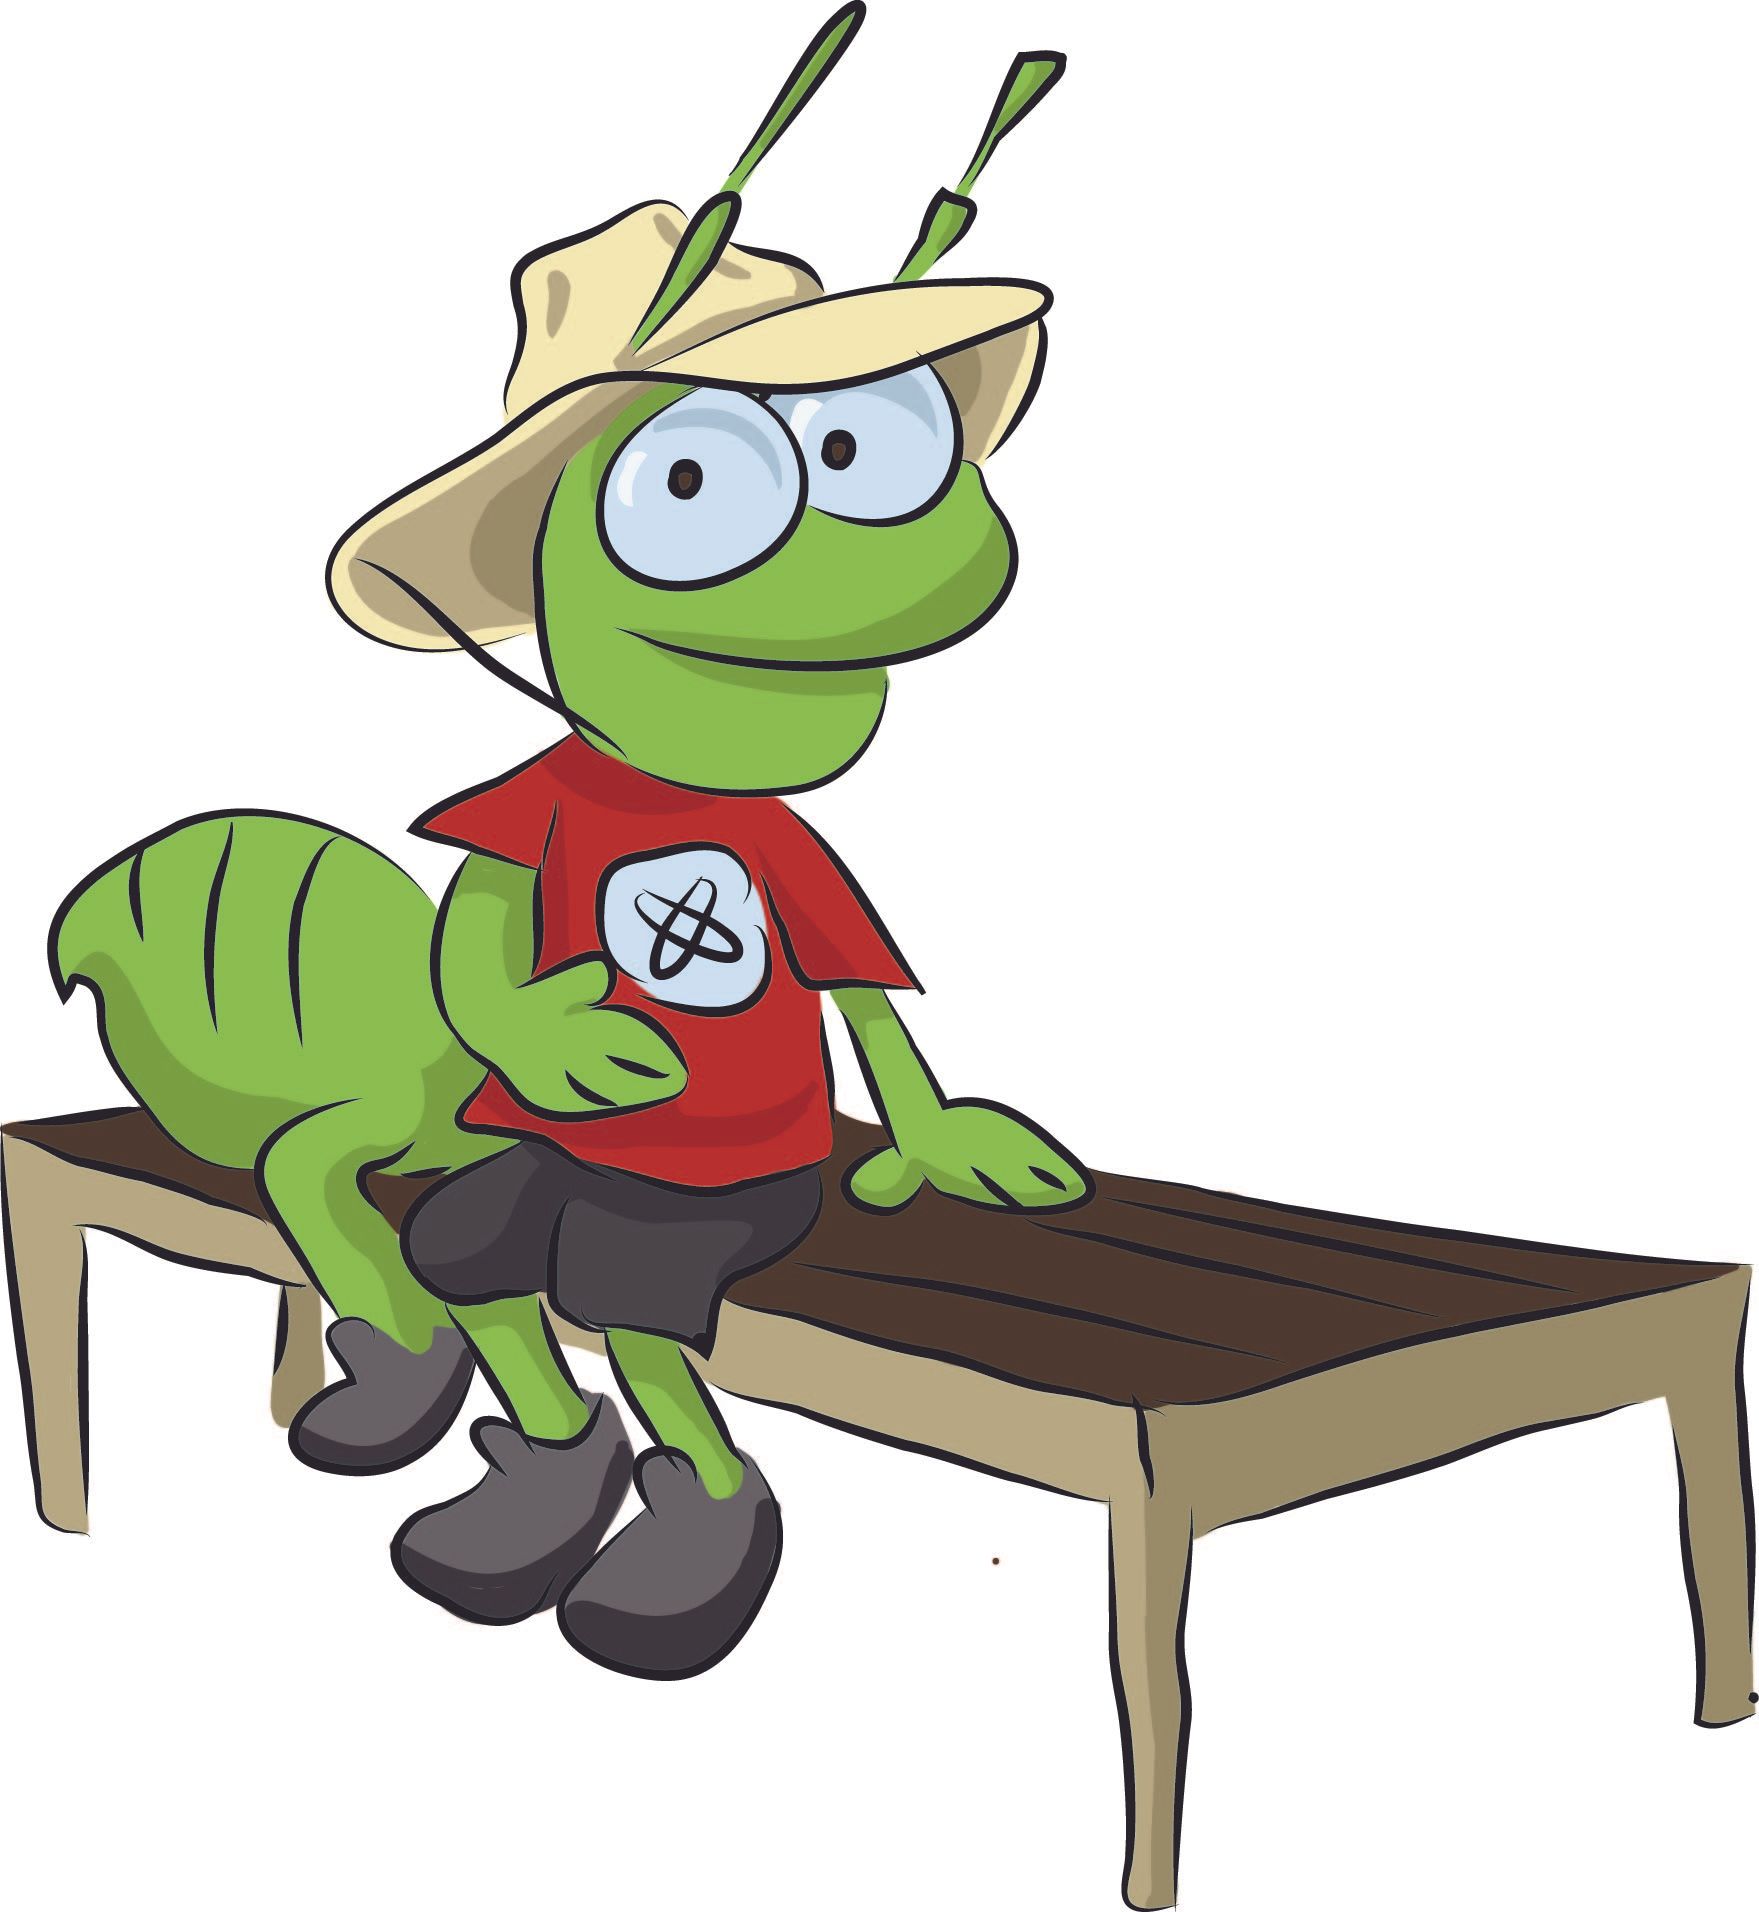 A cartoon ant wearing a hat is sitting on a bench